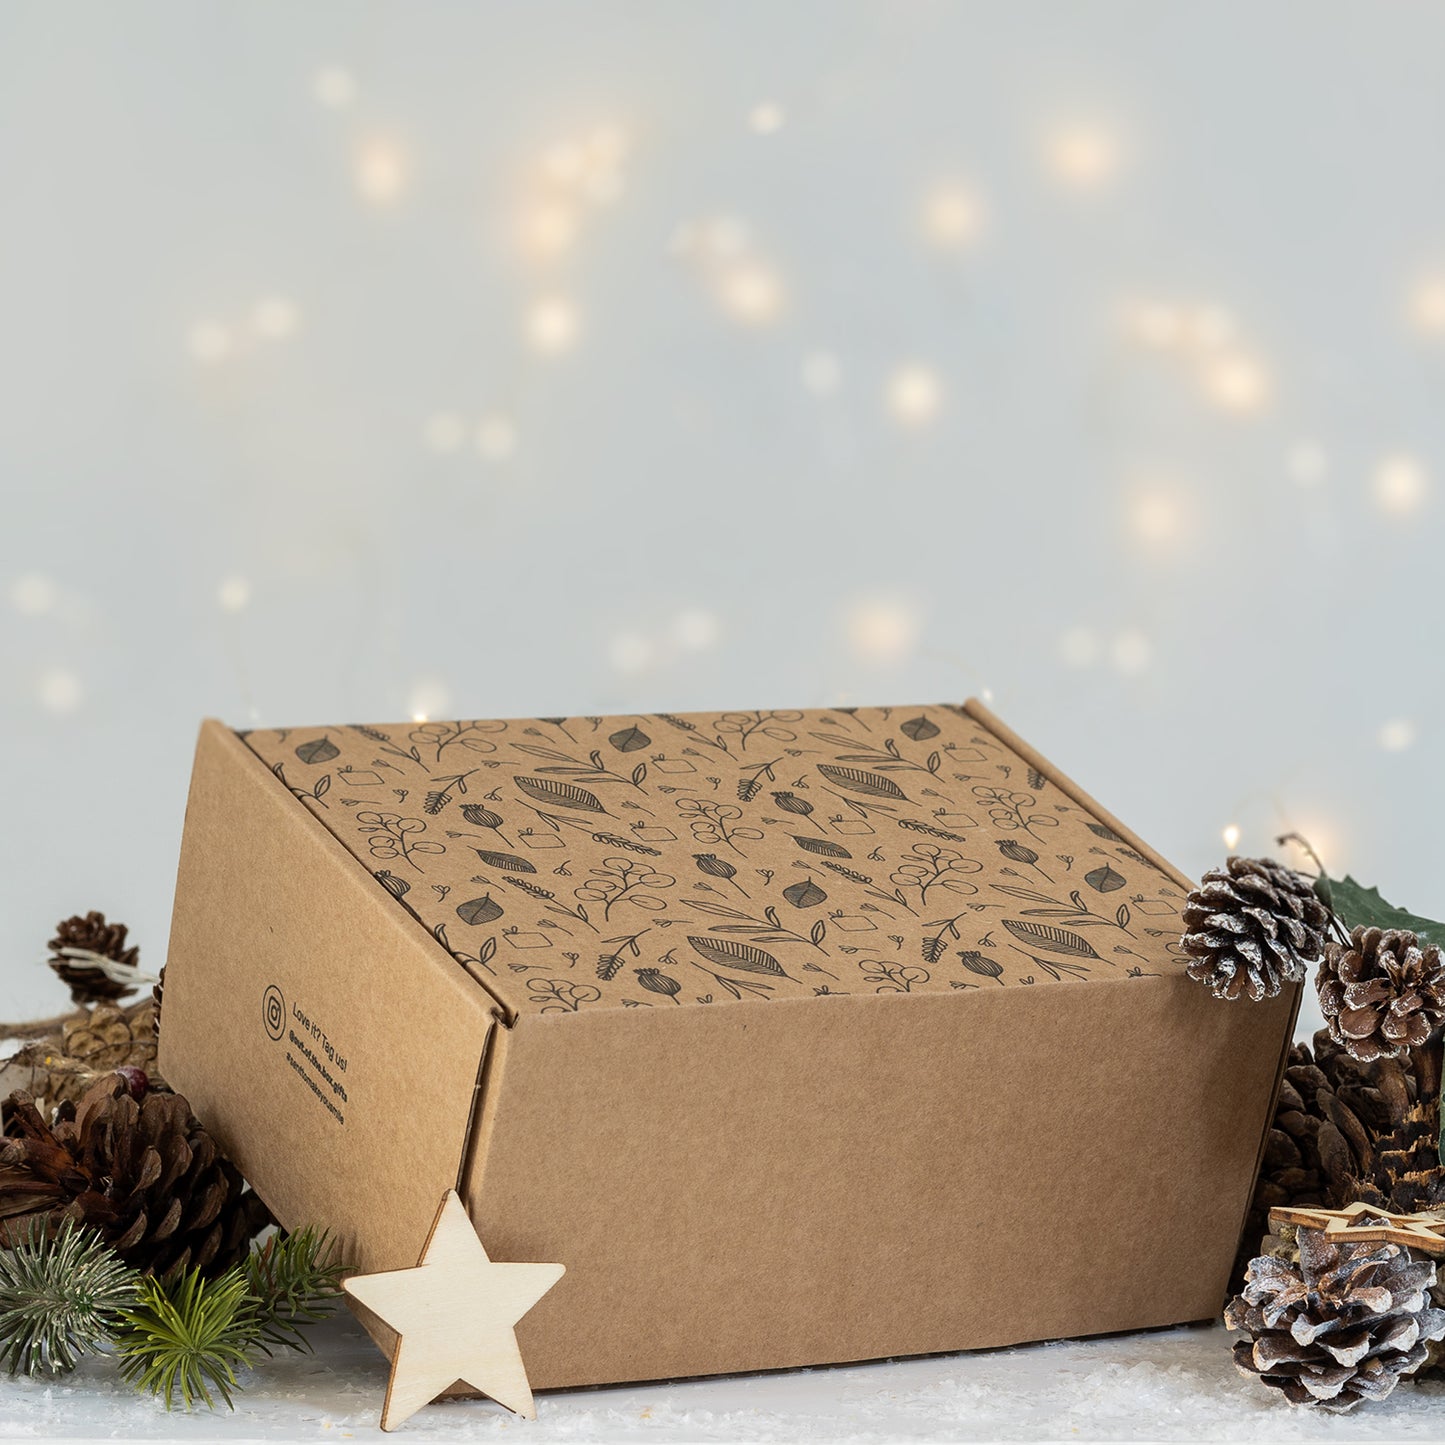 Cosy Christmas Gift Box from Out of the Box Gifts